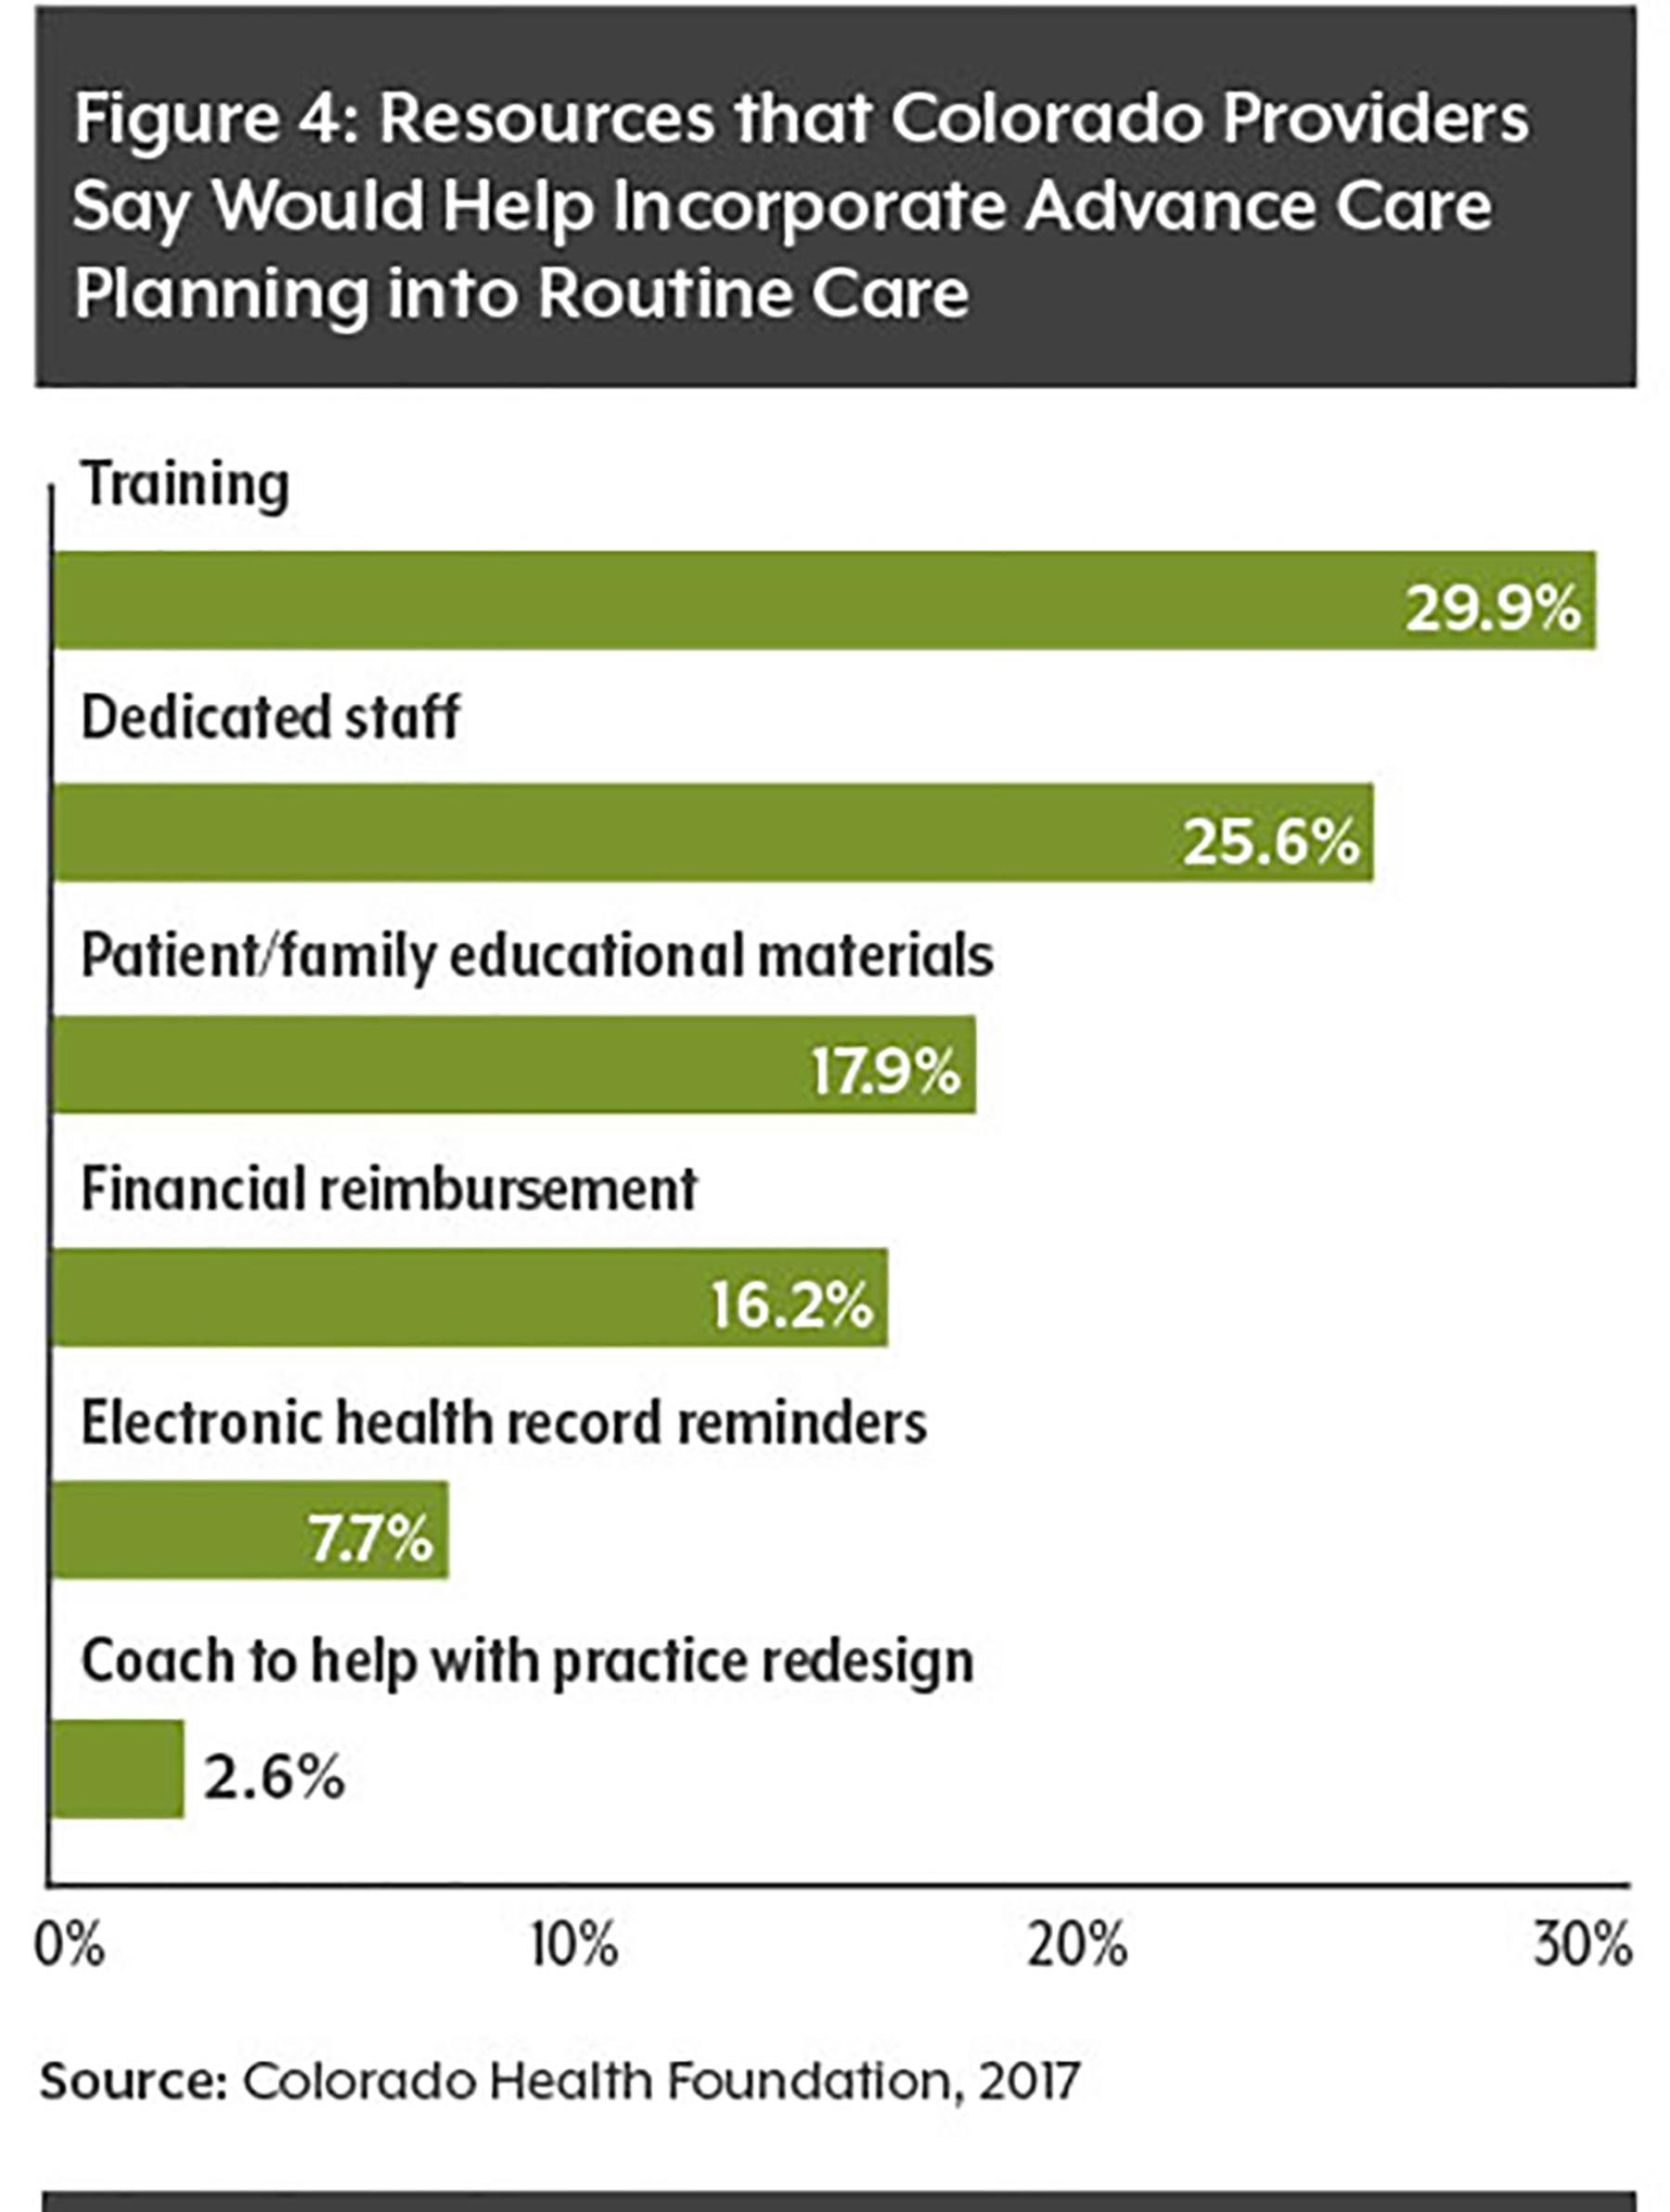 Resources That Colorado Providers Say Would Help Incorporate Advance Care Planning Into Routine Care